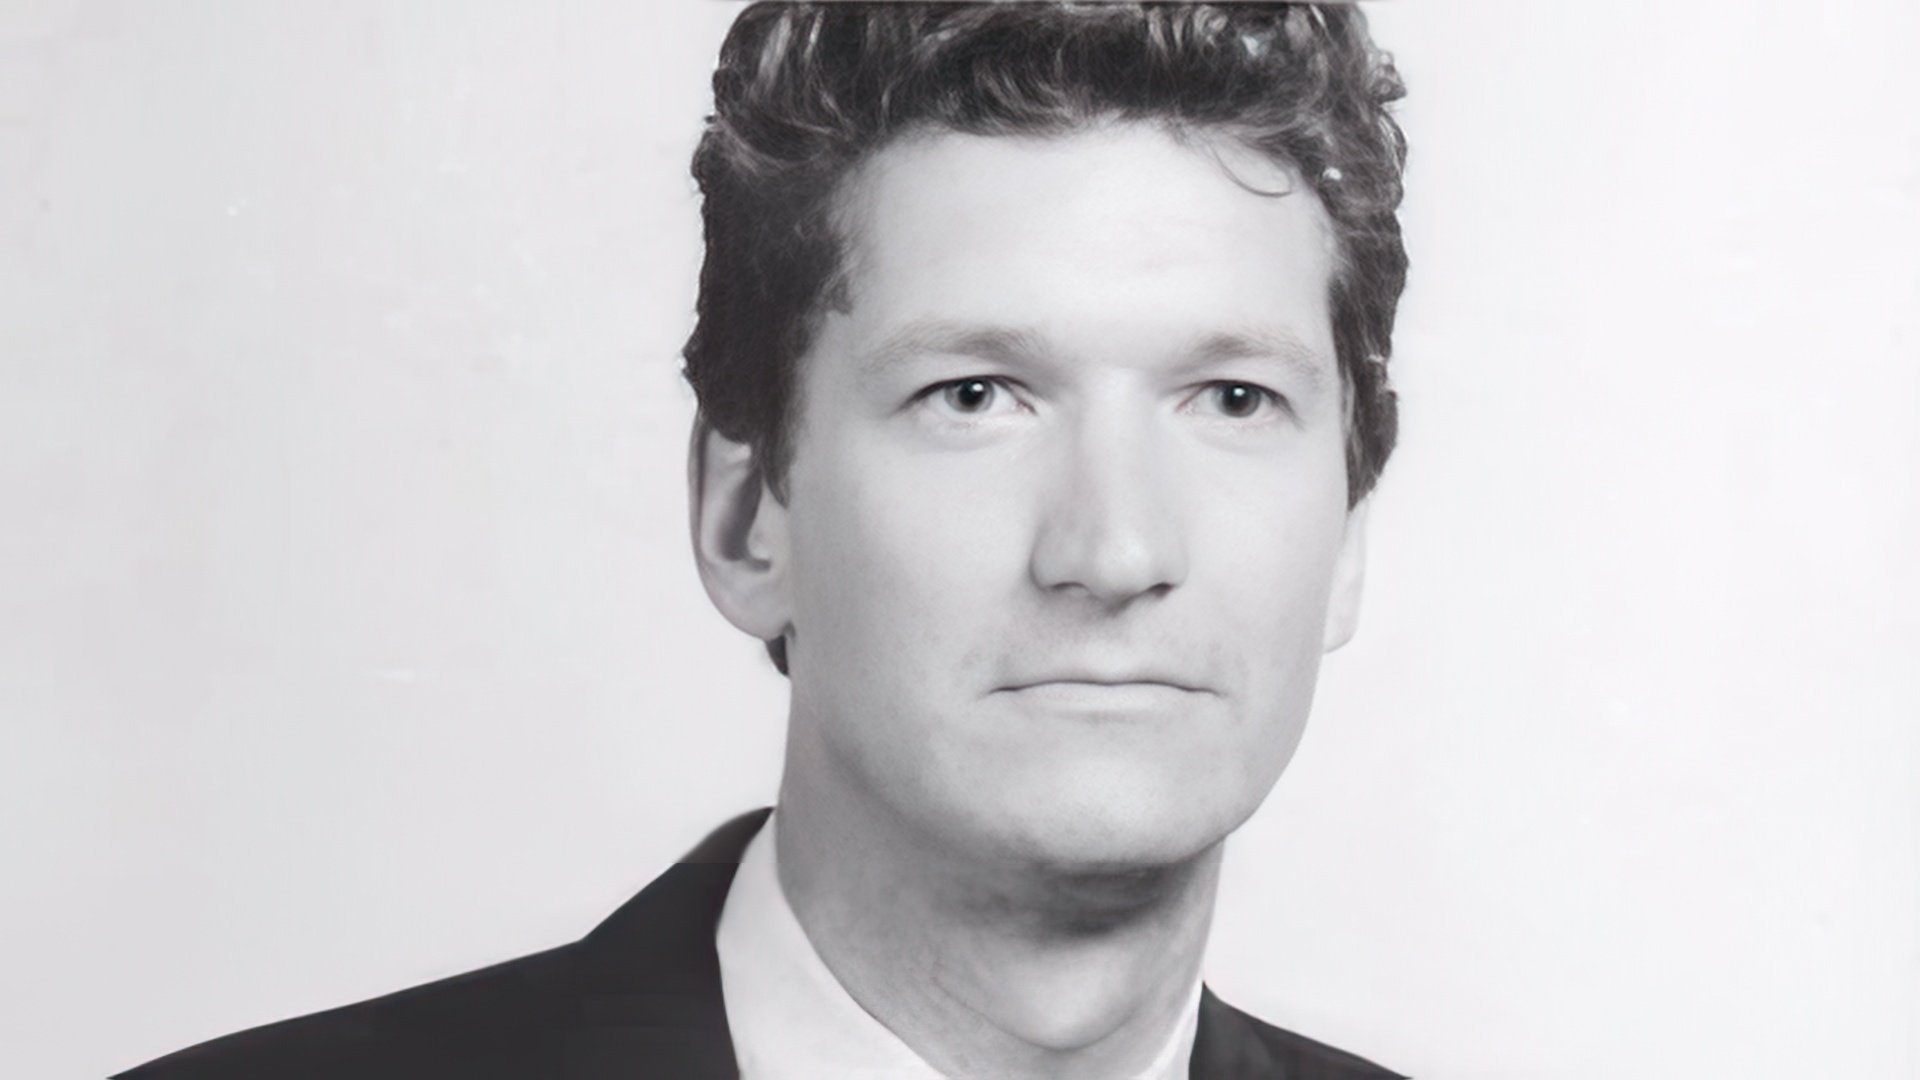 Tim Cook in his youth